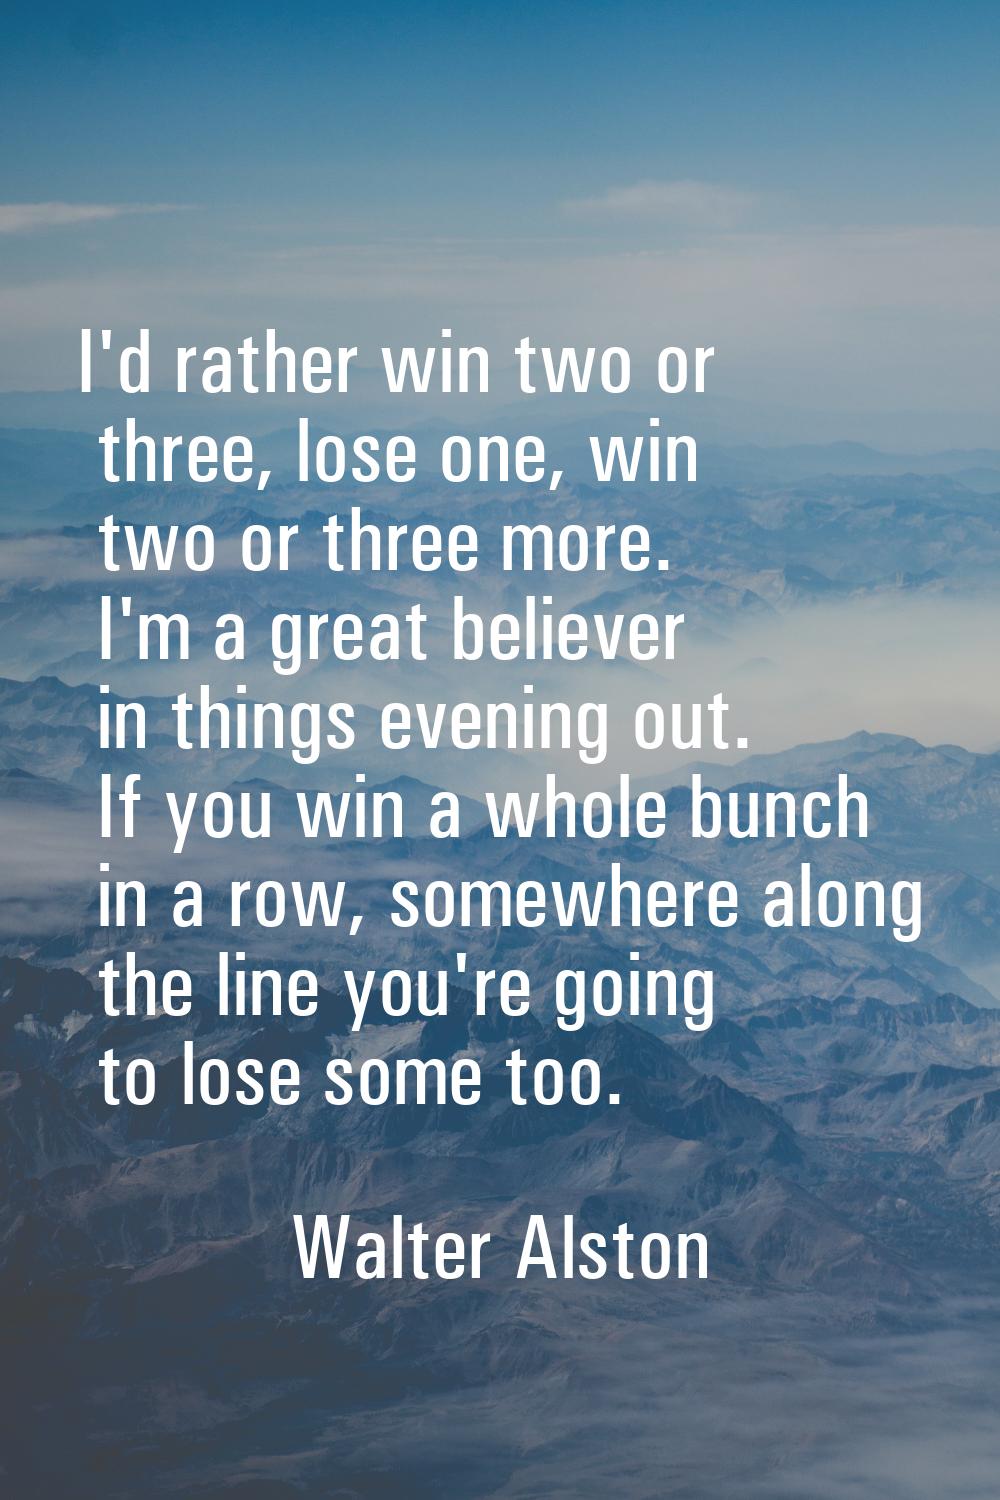 I'd rather win two or three, lose one, win two or three more. I'm a great believer in things evenin